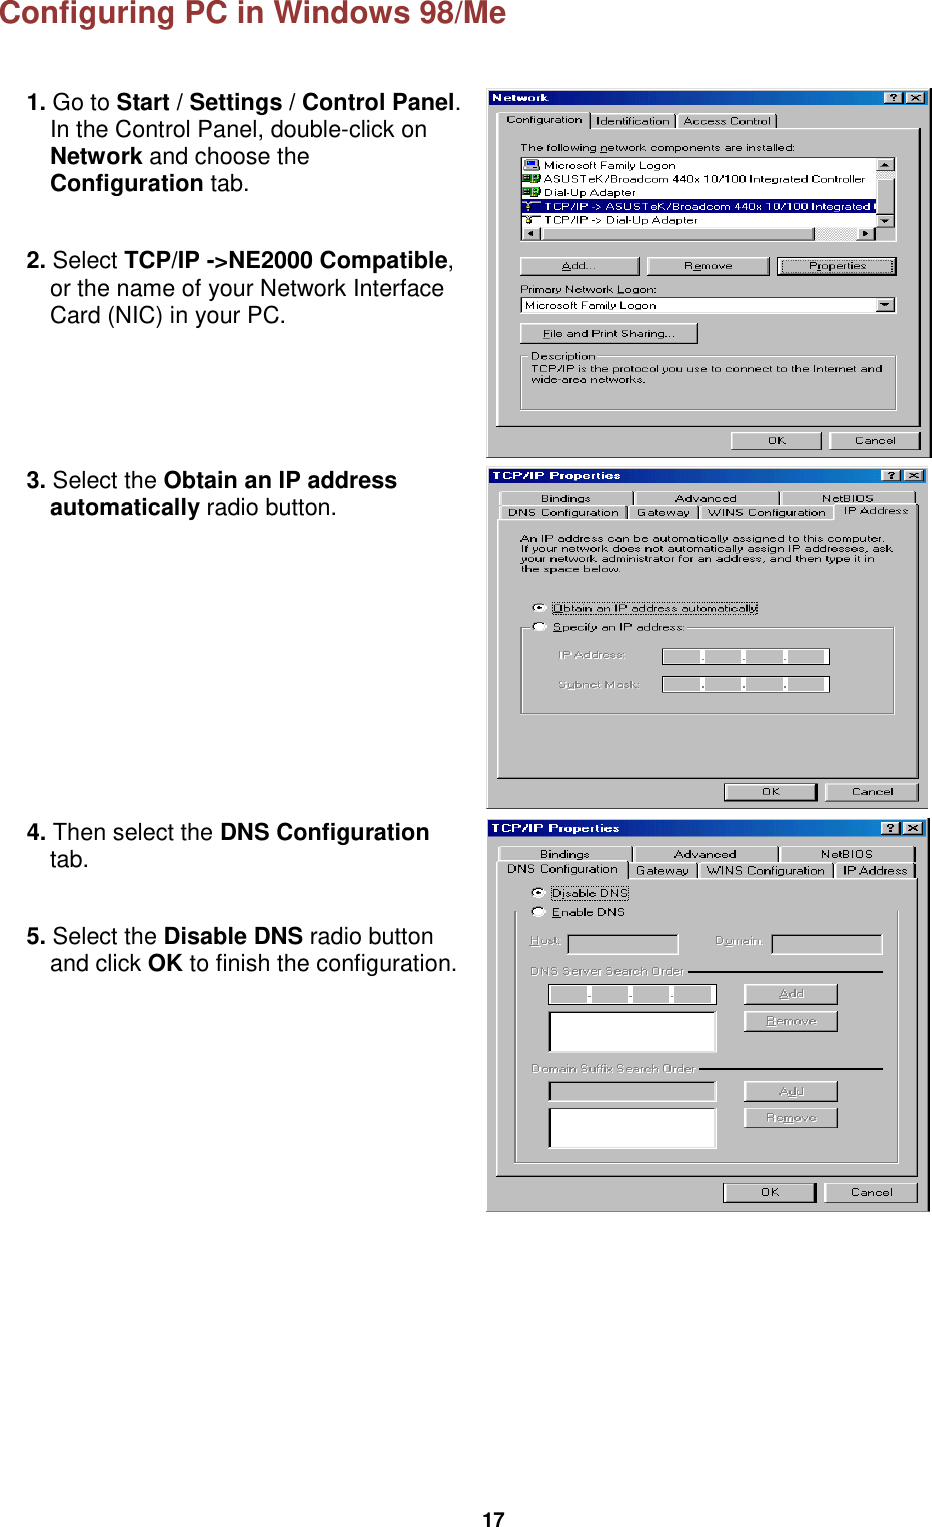  17 Configuring PC in Windows 98/Me  1. Go to Start / Settings / Control Panel. In the Control Panel, double-click on Network and choose the Configuration tab.  2. Select TCP/IP -&gt;NE2000 Compatible, or the name of your Network Interface Card (NIC) in your PC.   3. Select the Obtain an IP address automatically radio button.  4. Then select the DNS Configuration tab.  5. Select the Disable DNS radio button and click OK to finish the configuration.      